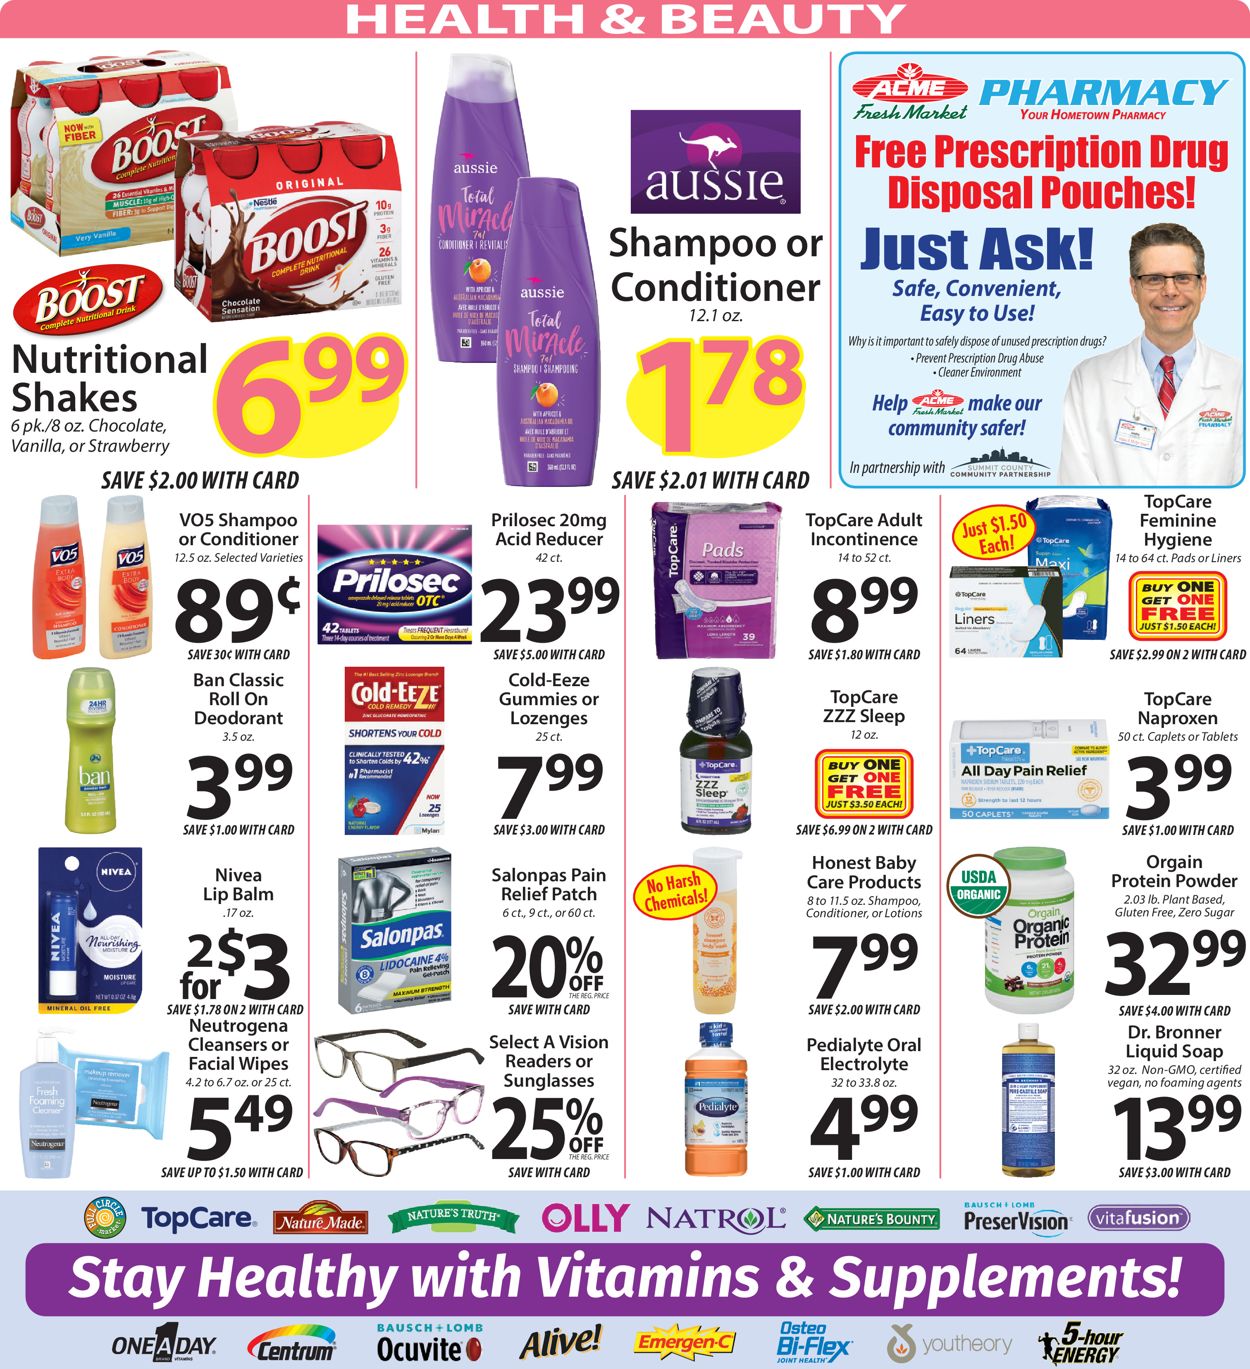 Acme Fresh Market Ad from 02/25/2021